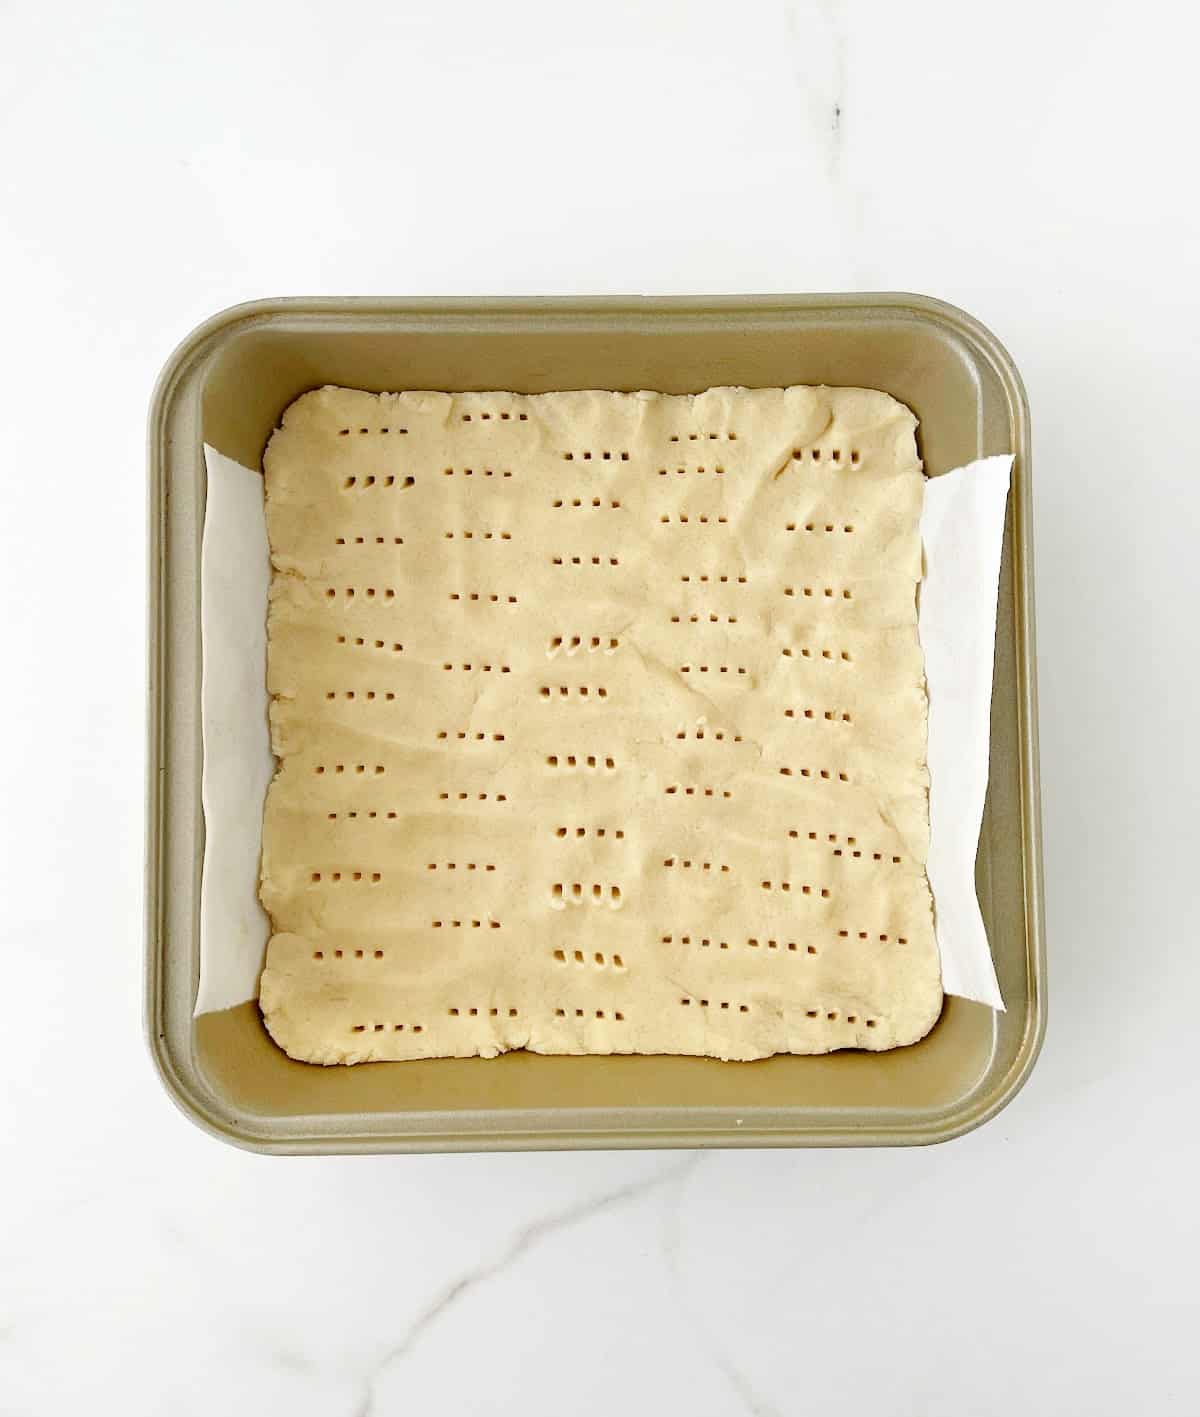 Parchment lined square baking pan on a white surface with pricked shortbread crust.